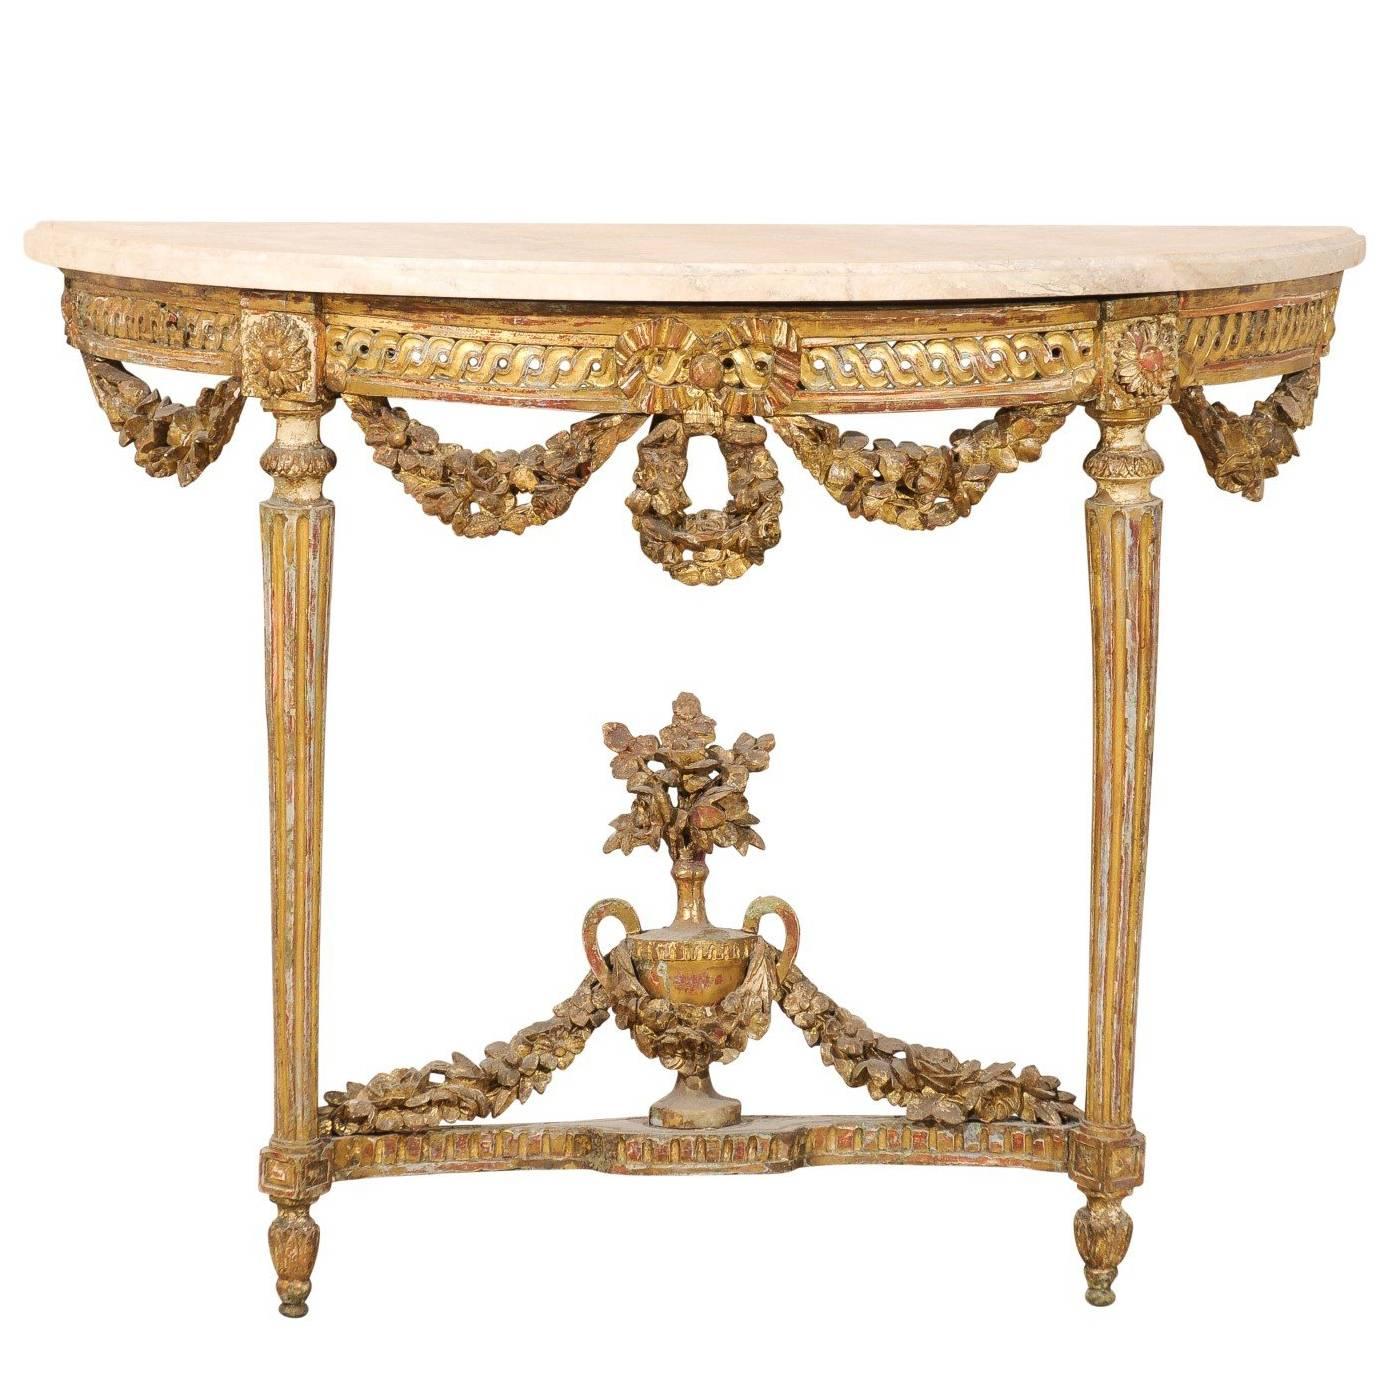 Early 19th C. Italian Gilt & Carved-Wood Demi Console Table with Marble Top